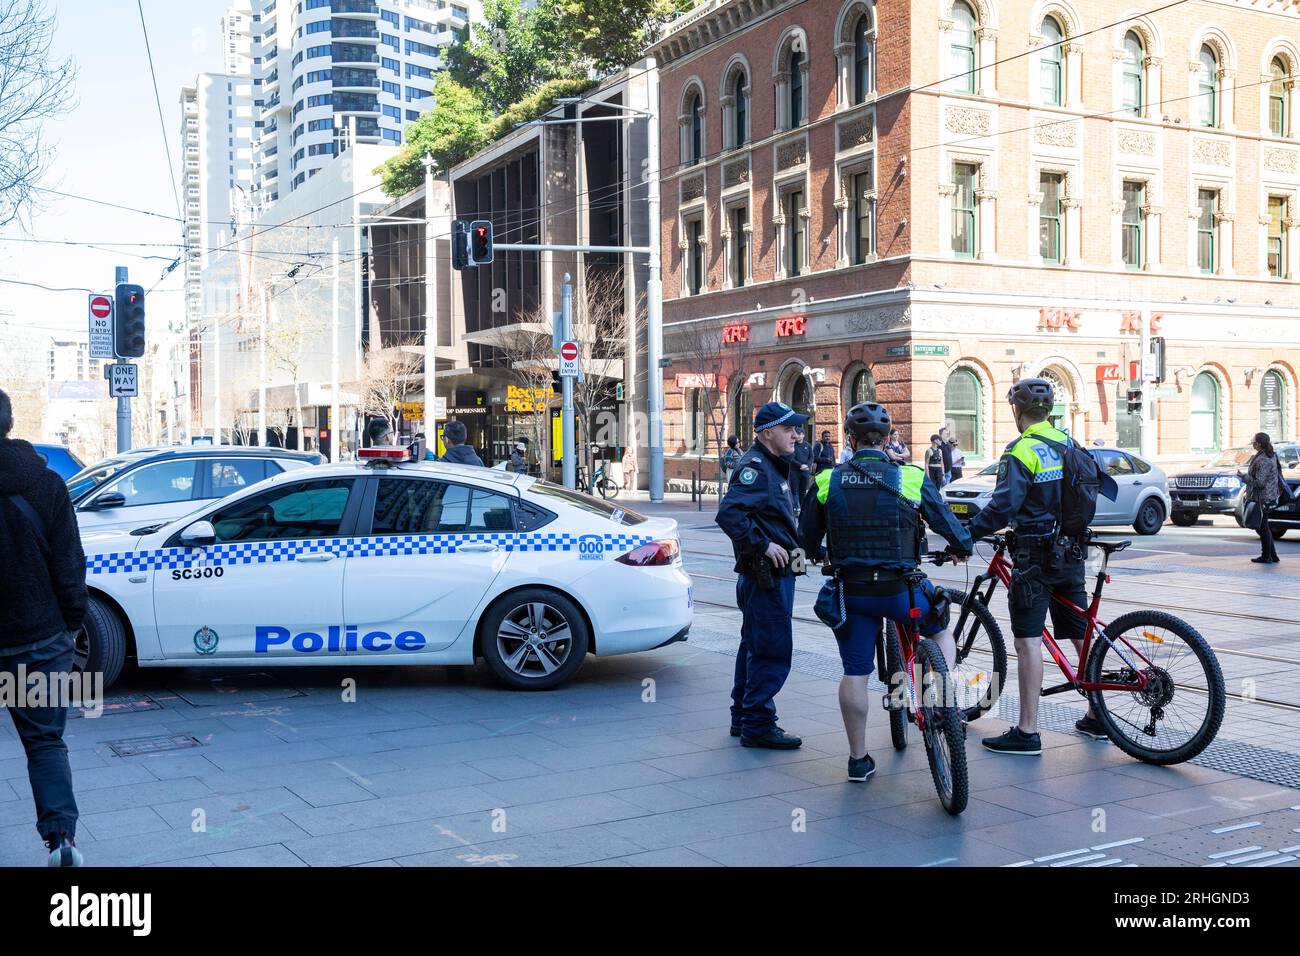 Sydney Australia New South Wales police officers and police car, police officers riding bicycles on police patrol,Australia Stock Photo